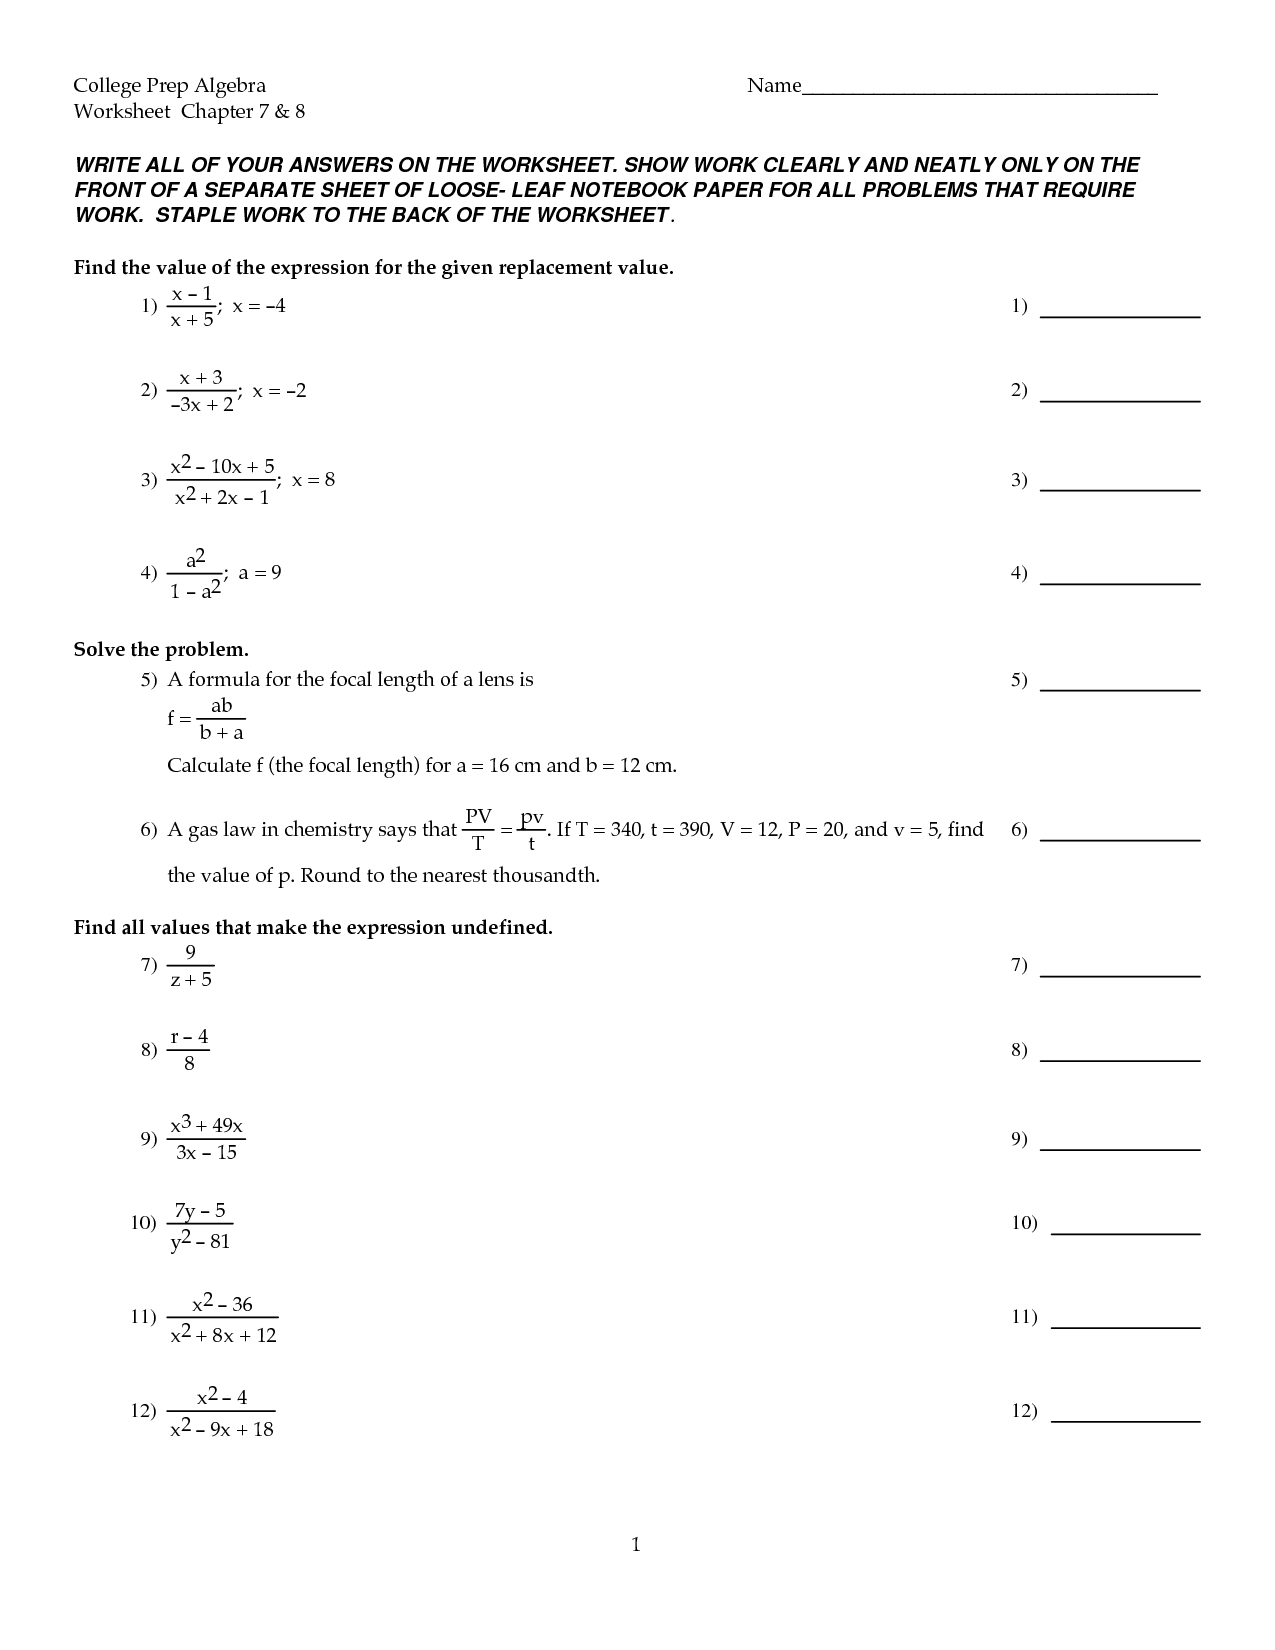 16 Best Images of College Math Worksheets - College ...